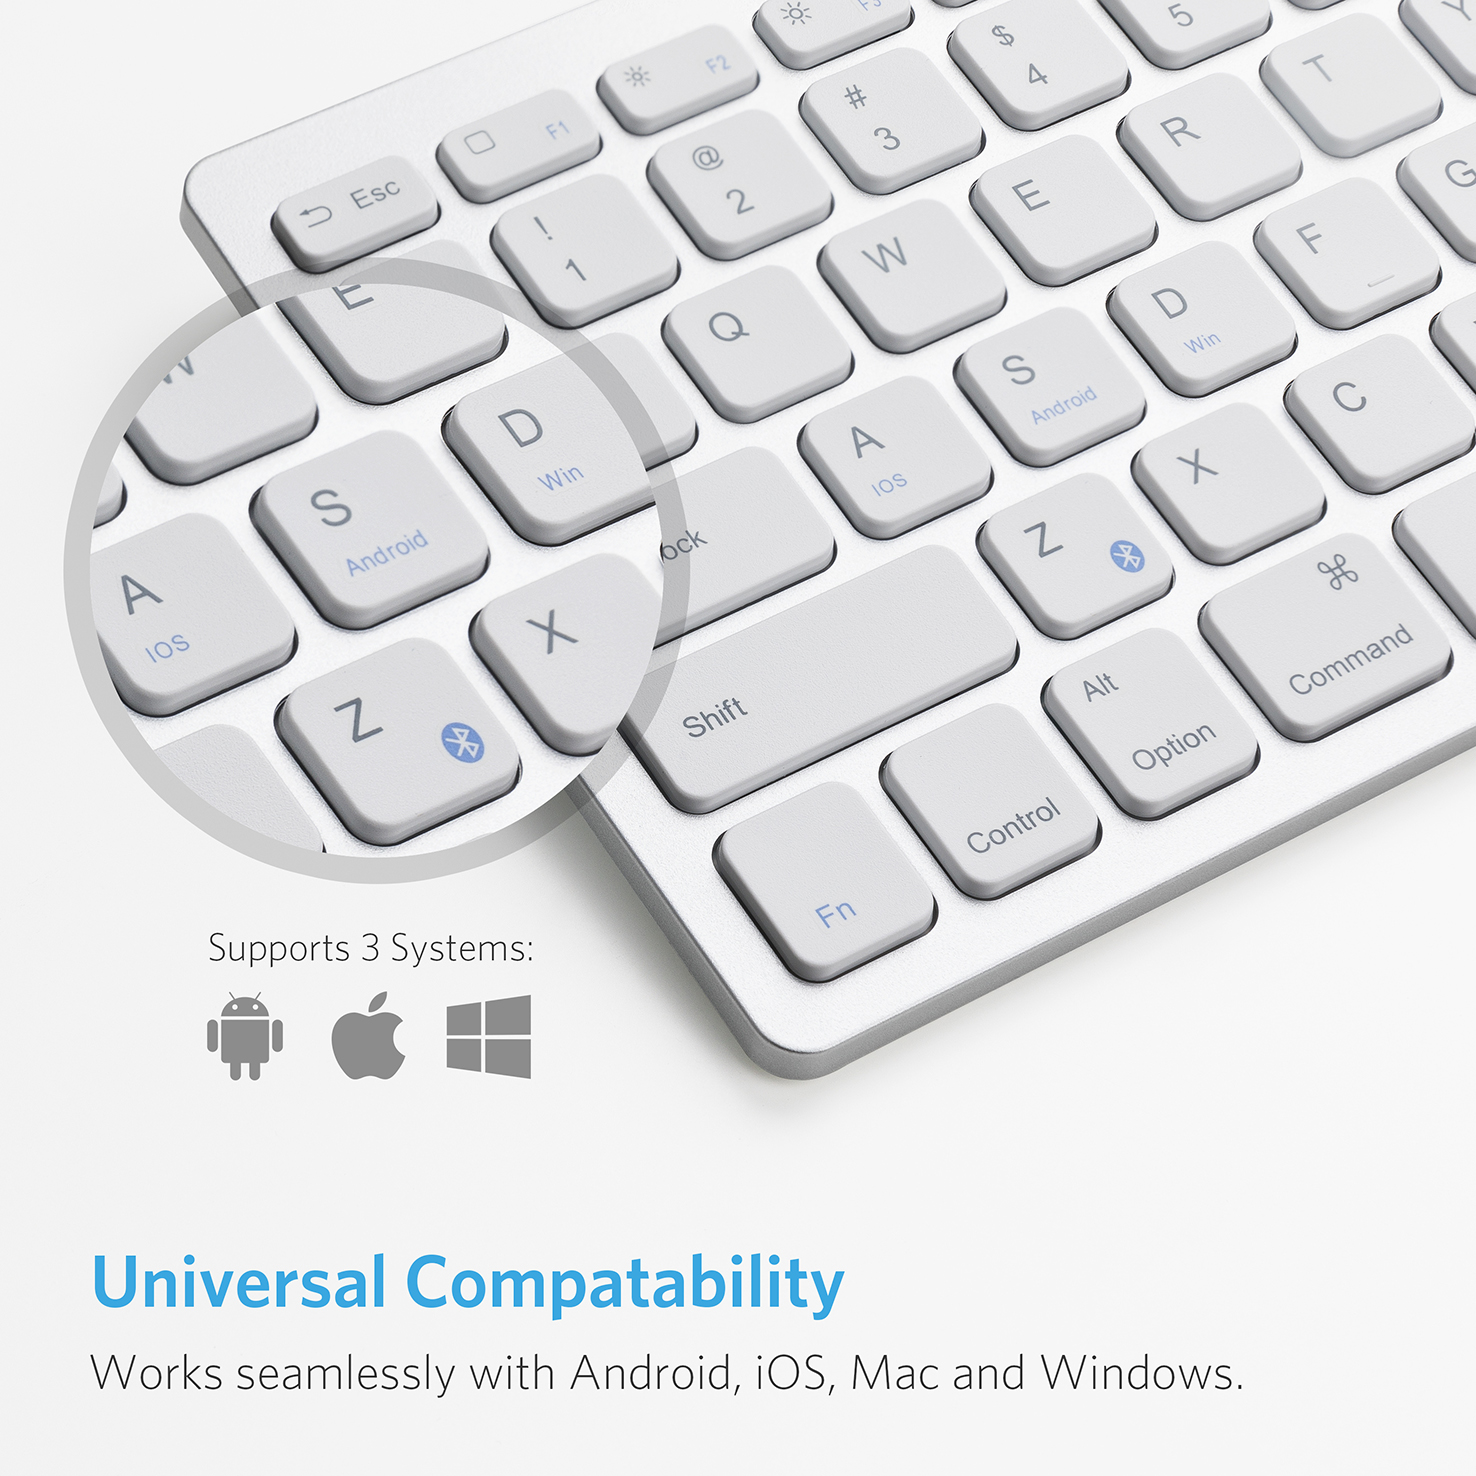 Anker Ultra Compact Slim Profile Wireless Bluetooth Keyboard for iOS, Android, Windows and Mac - image 5 of 6